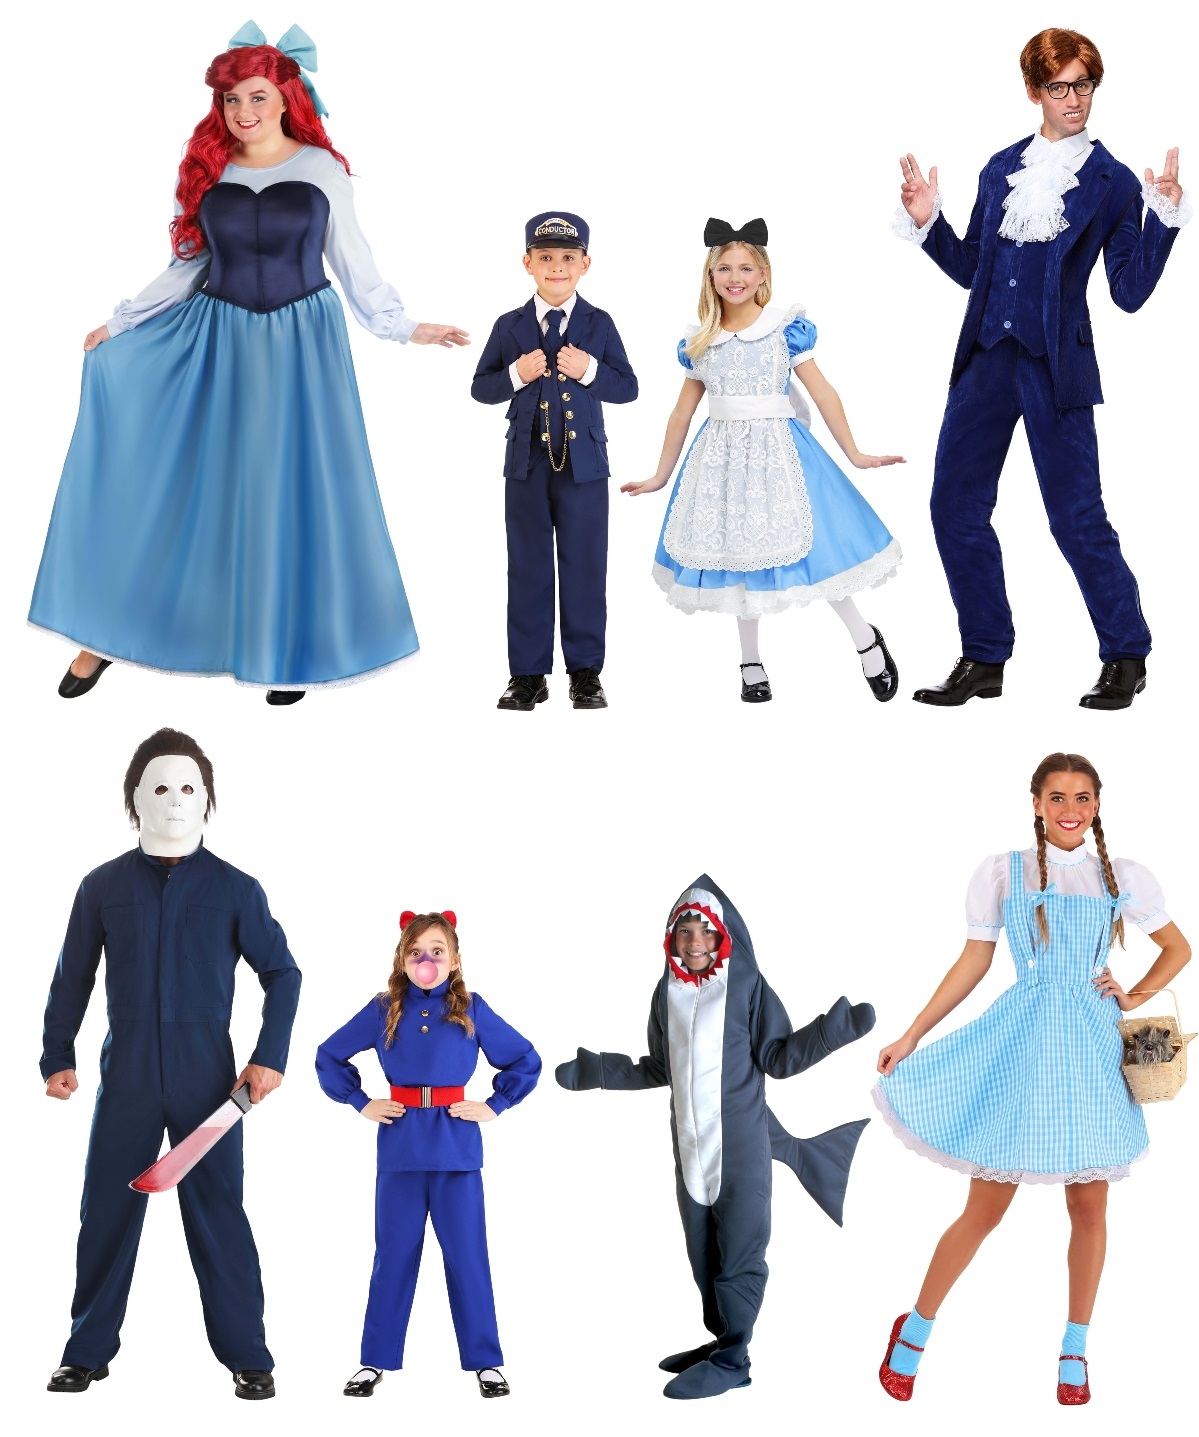 Colorful Costume Ideas for a Spectrum of Fun [Costume Guide ...